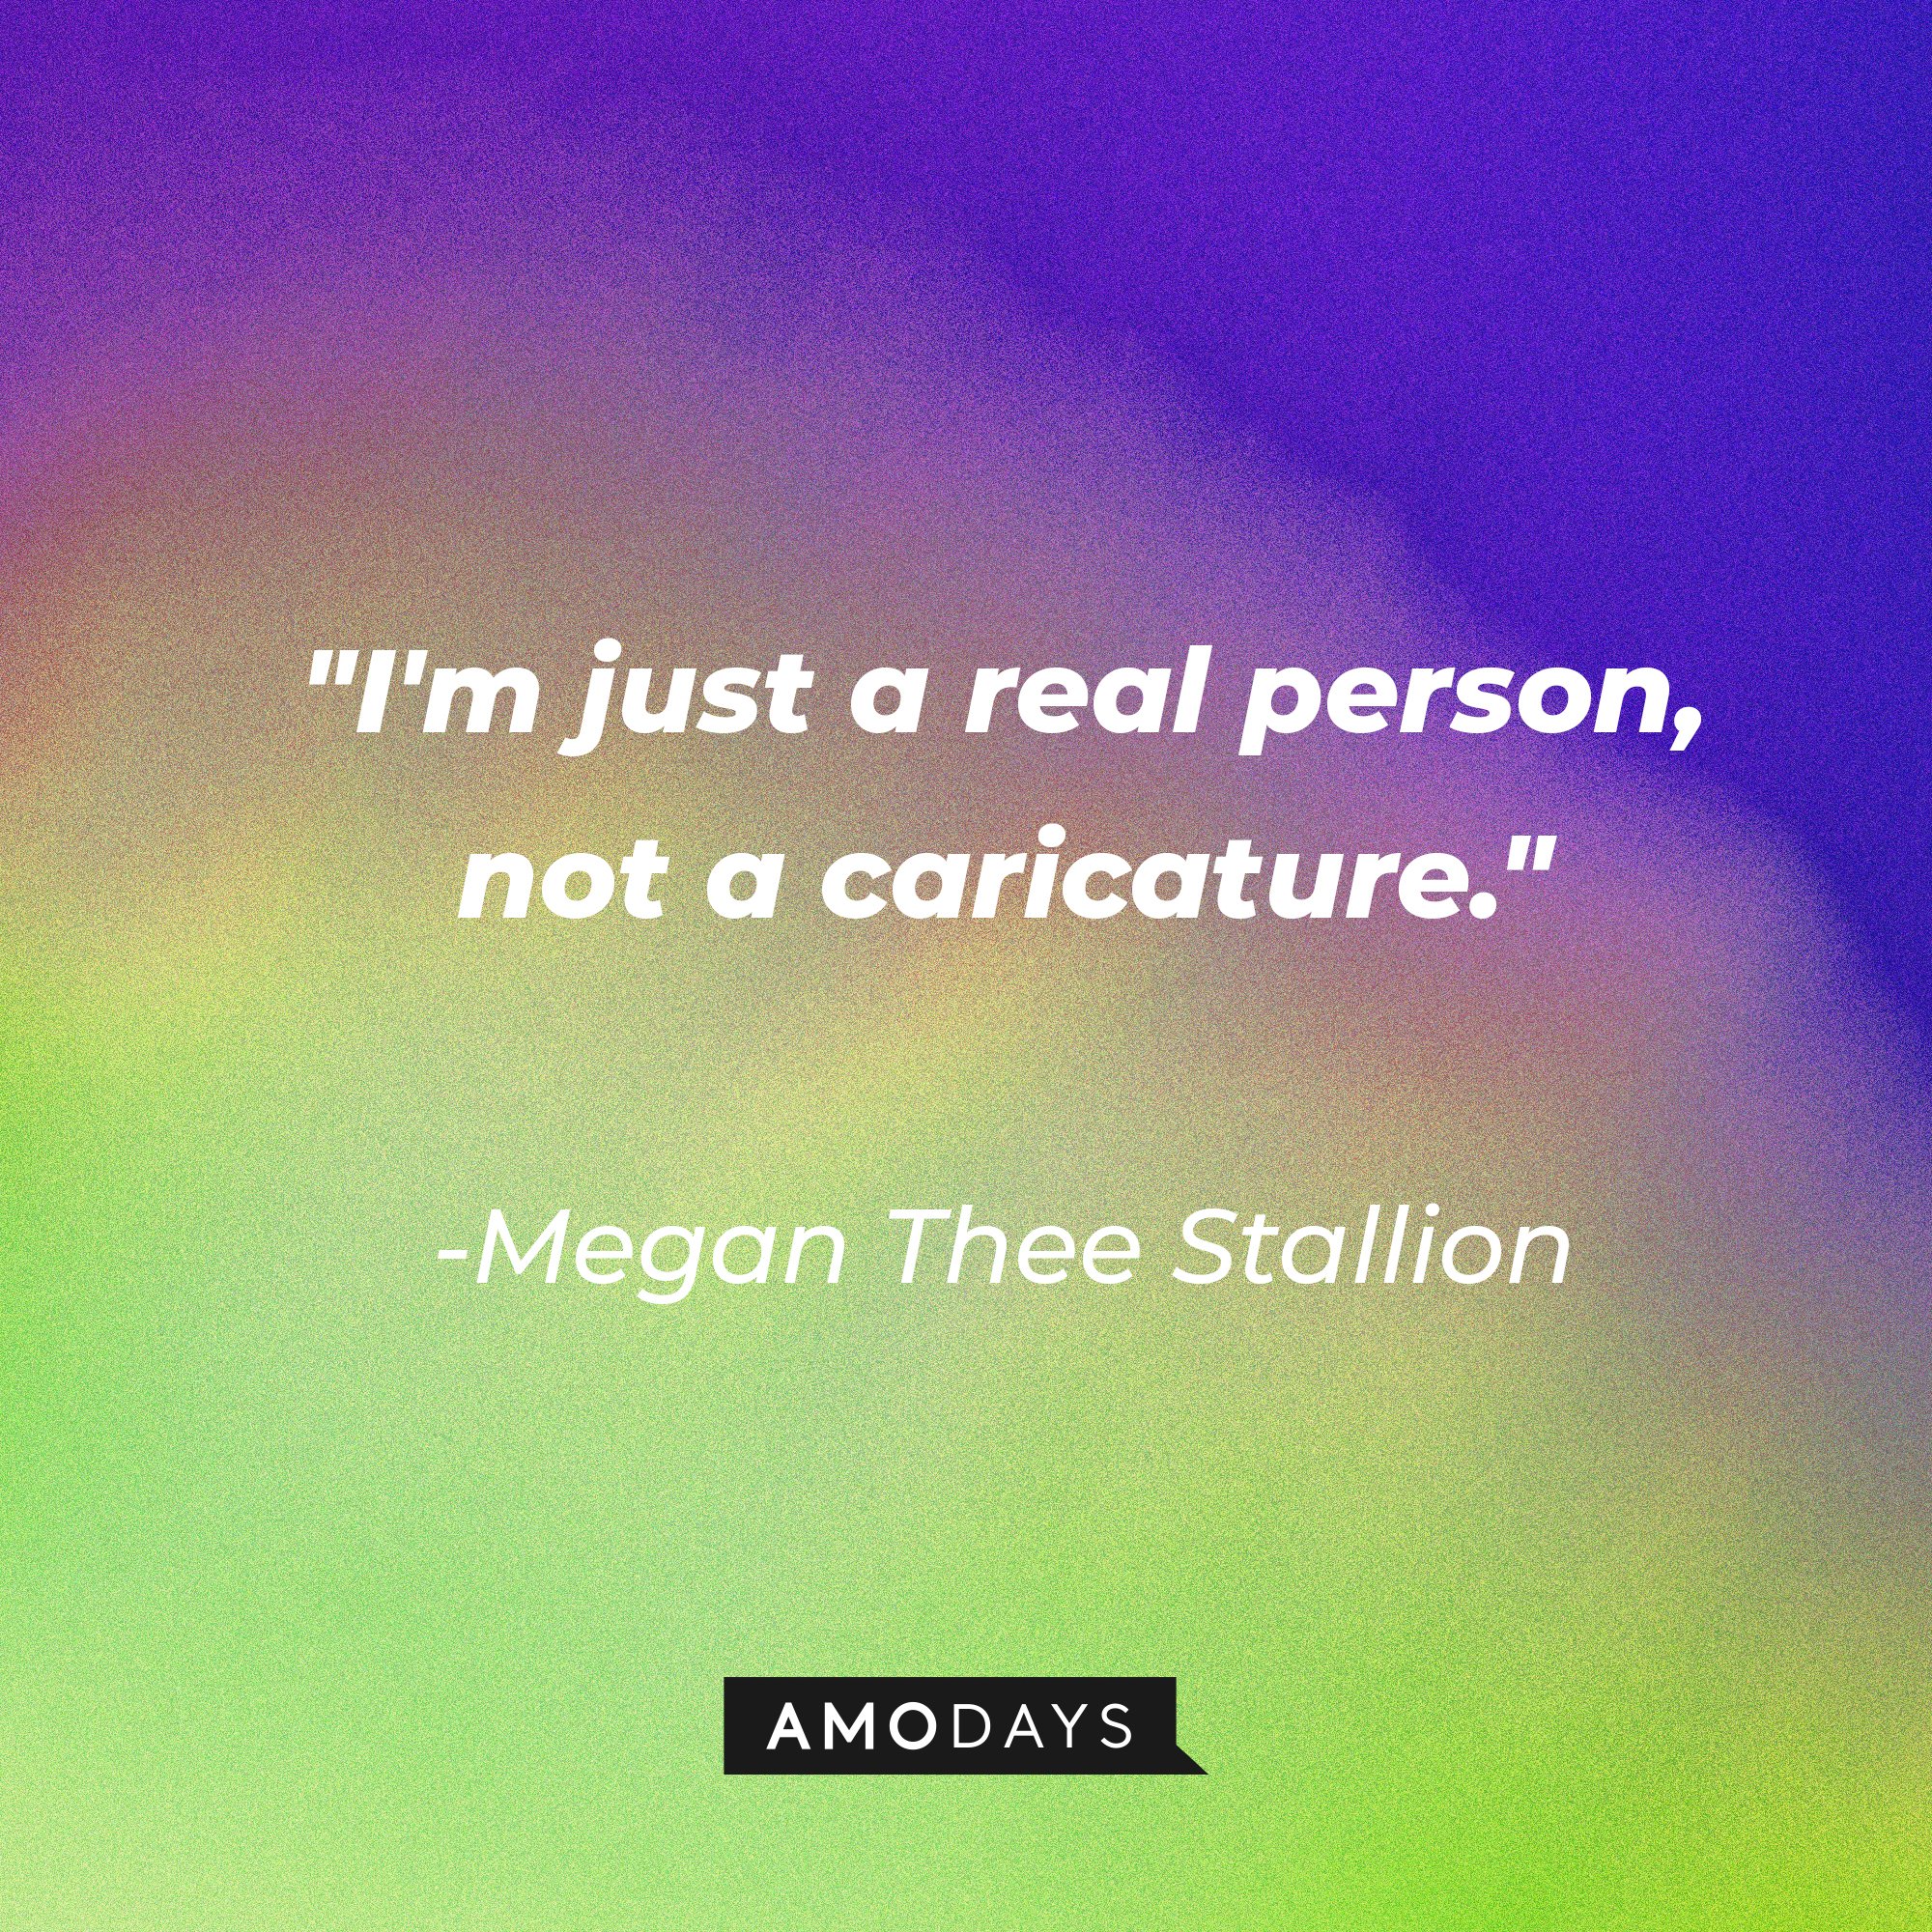 Megan Thee Stallion’s quote: "I'm just a real person, not a caricature." | Image: AmoDays 